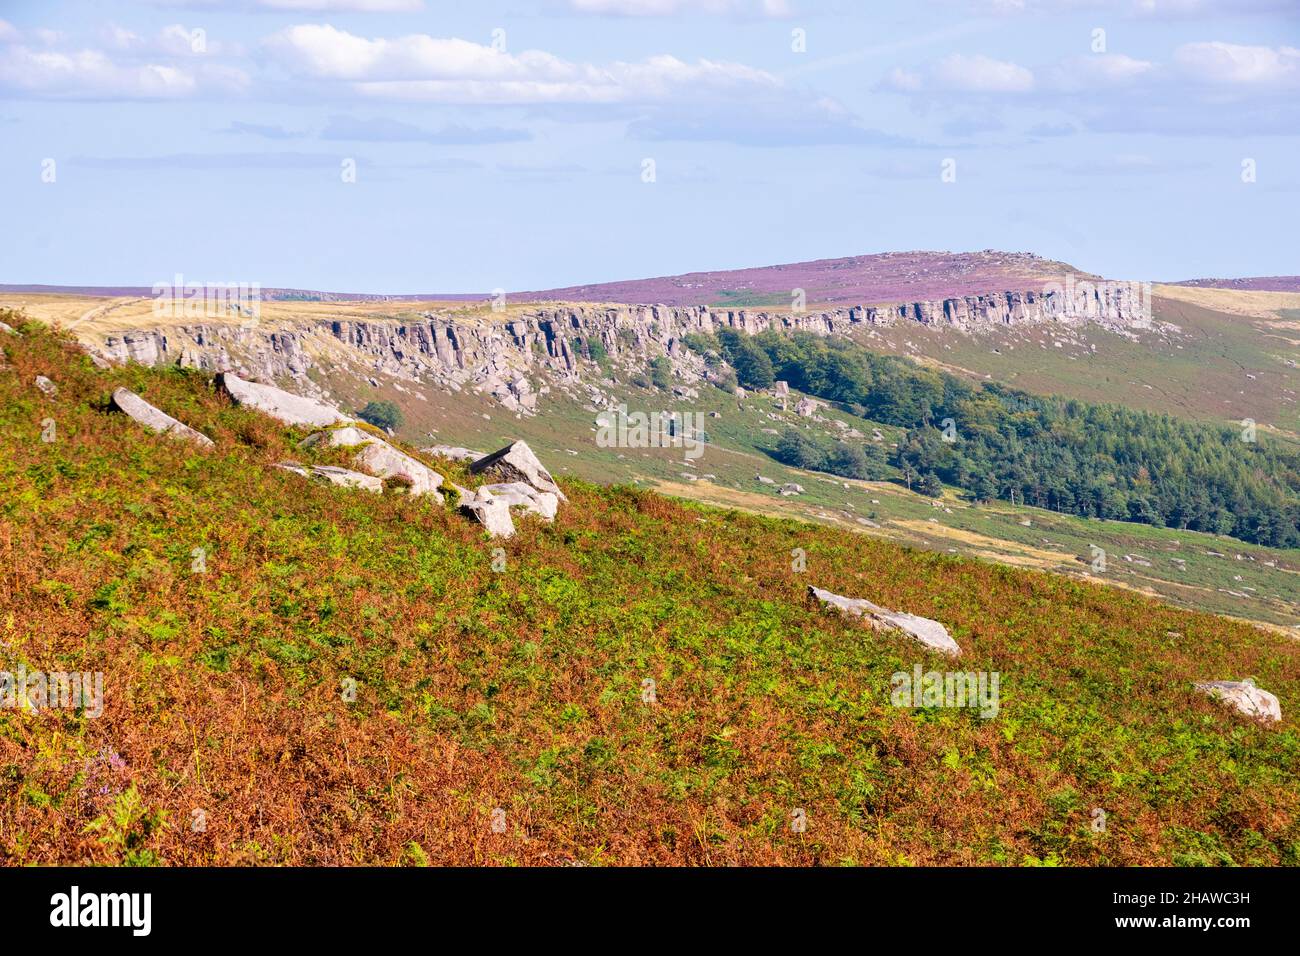 Stanage Edge is a 4 mile long cliff edge or gritstone escarpment breaking up the moorland landscape at Hope Valley, Peak District, UK Stock Photo